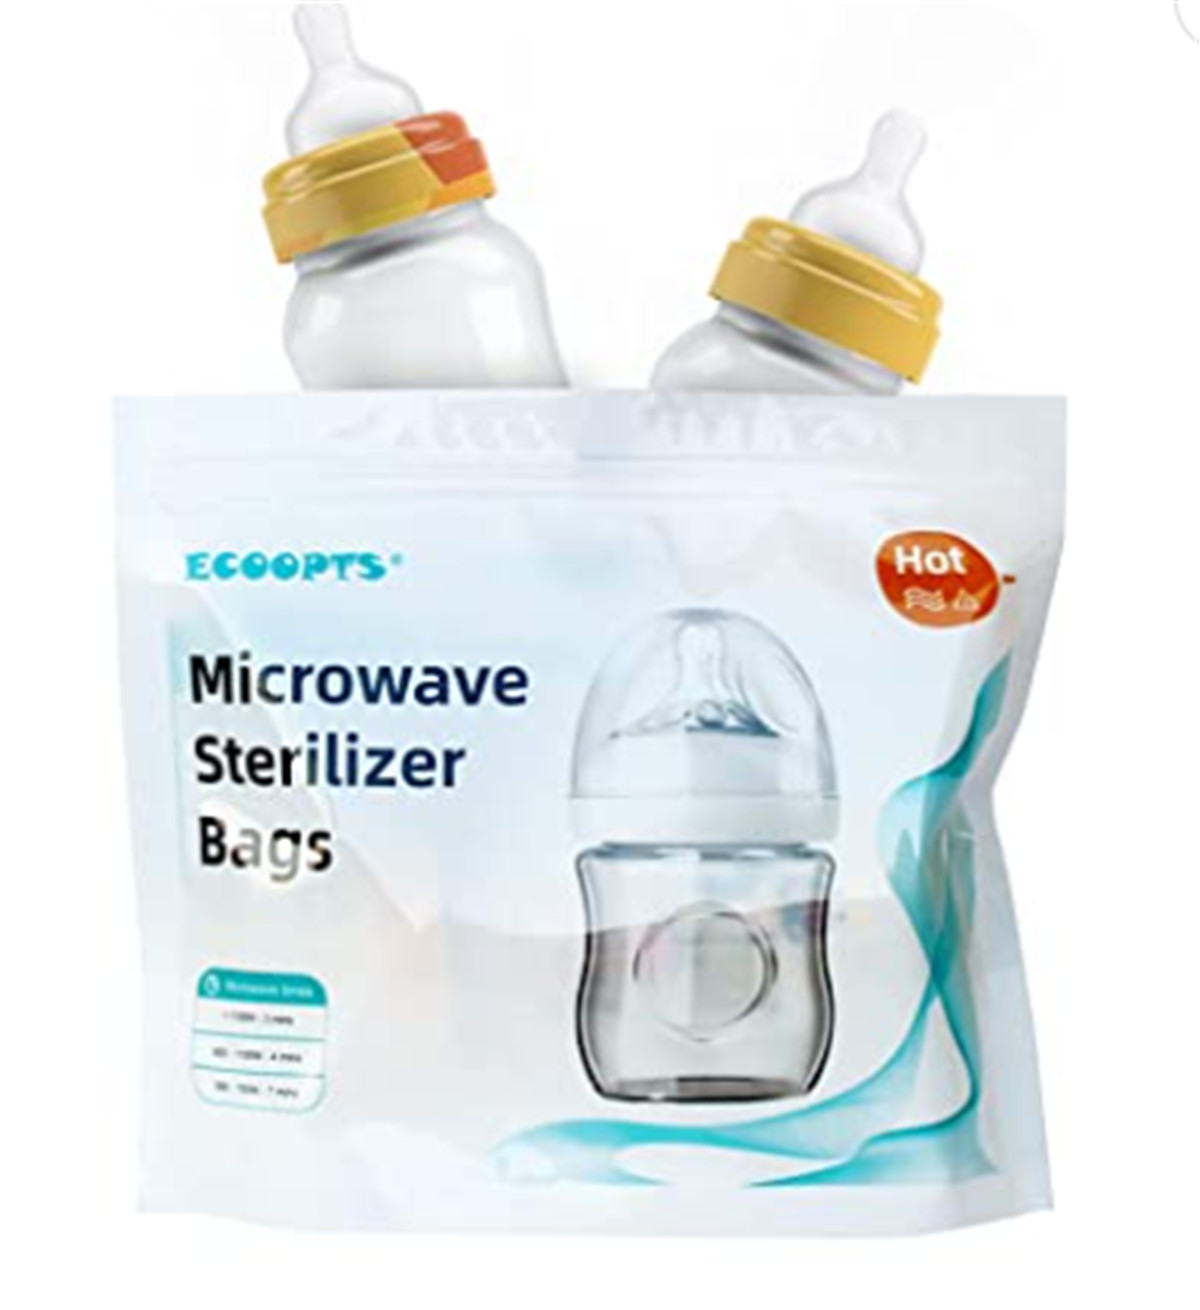 Microwave Bottle Sterilizer Bags Sterilizer Bags for Baby Bottles - 400 Uses - Reusable Microwave Steam Bags for Baby Bottles - Breast Pump Sterilizer Bags - Microwave Sterilizing Bags (5)